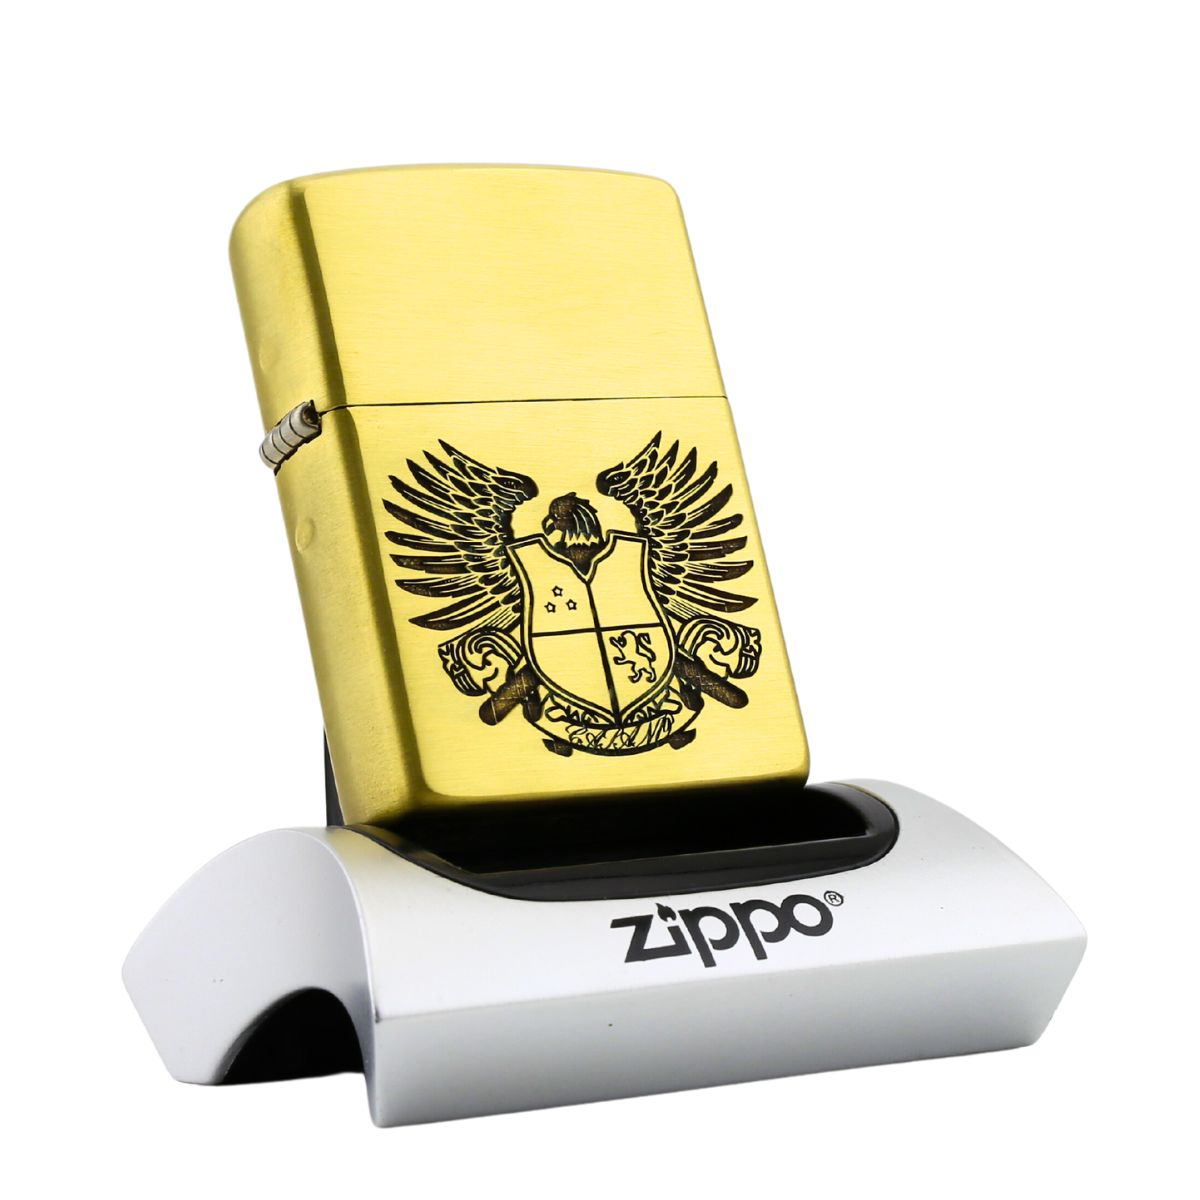 Zippo-Vincenzo-dong-khoi-vo-day`